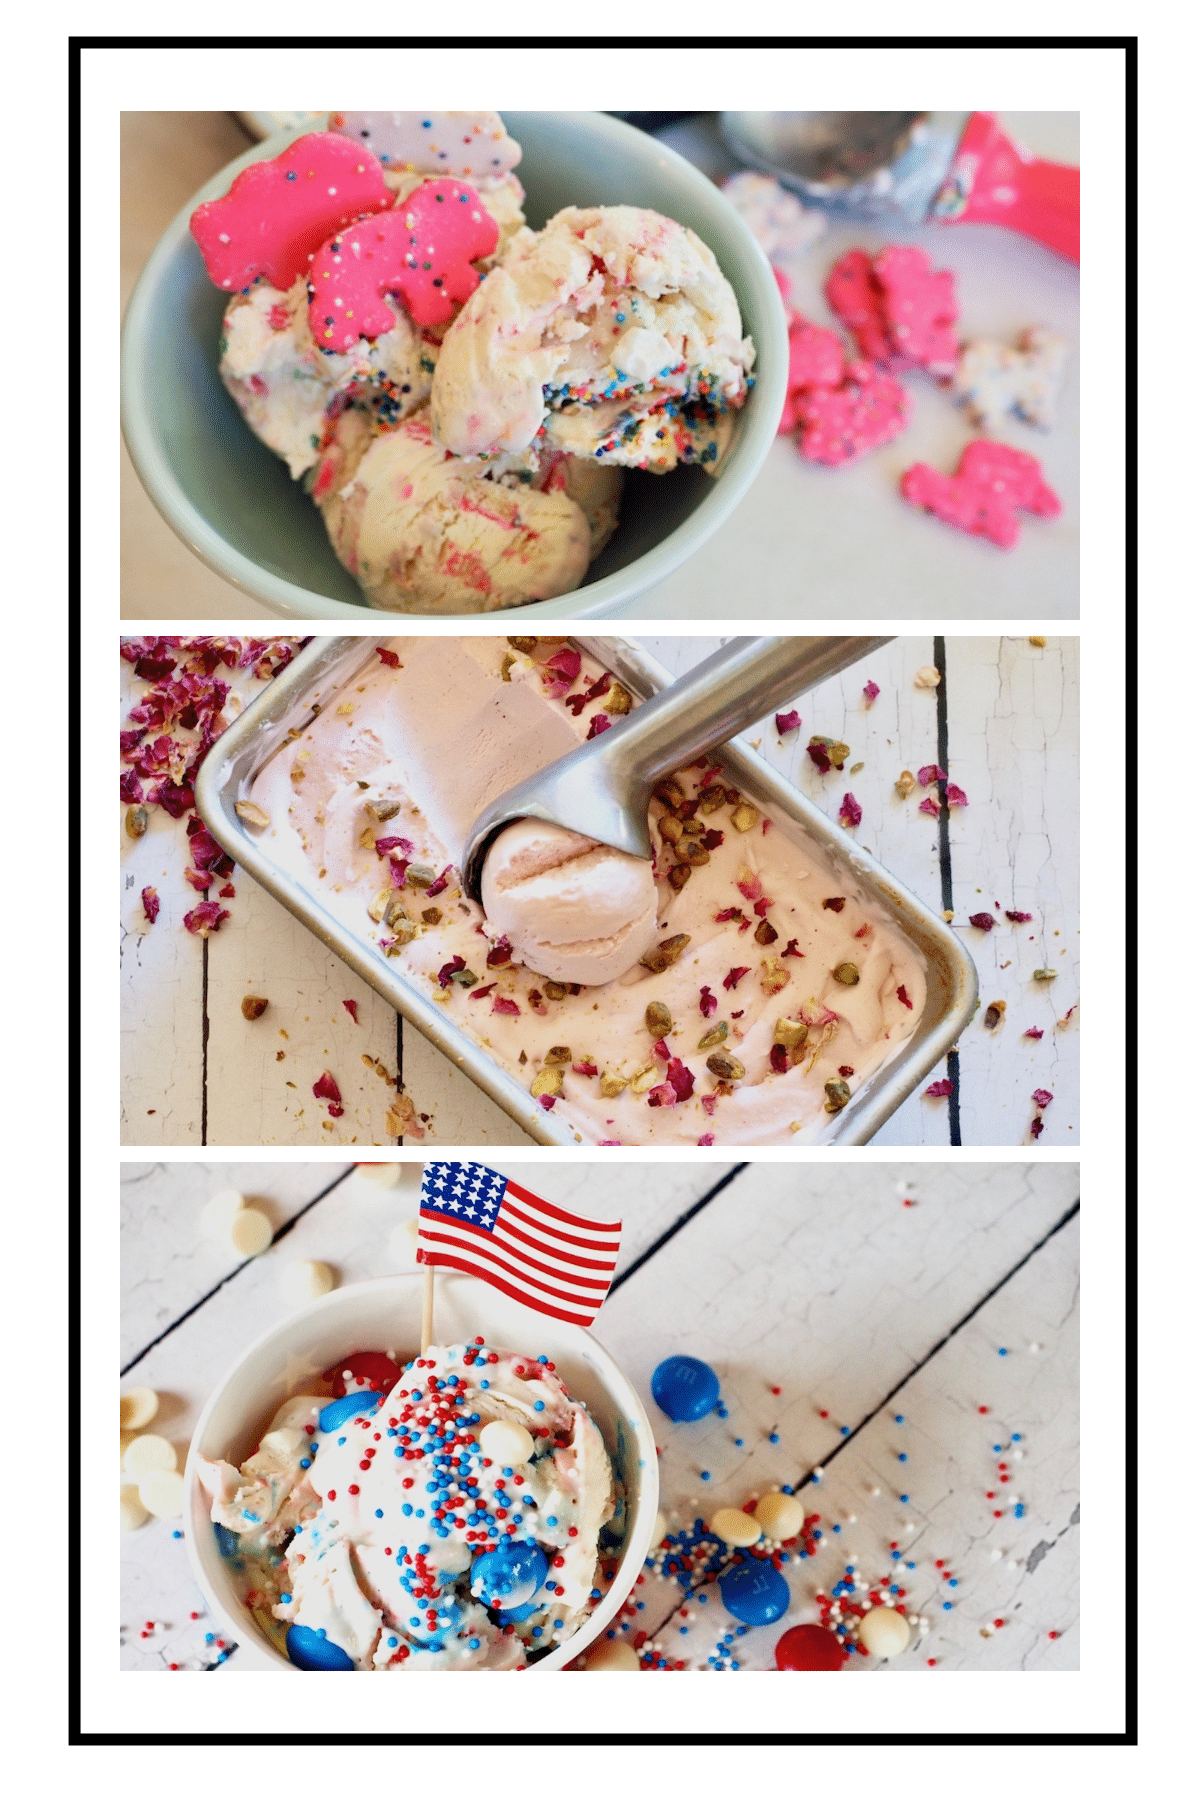 Pin with three images, top Circus Animal Ice Cream in bowl with cookies around, middle rose pistachio ice cream in pan and bottom red, white and blue ice cream in cup.